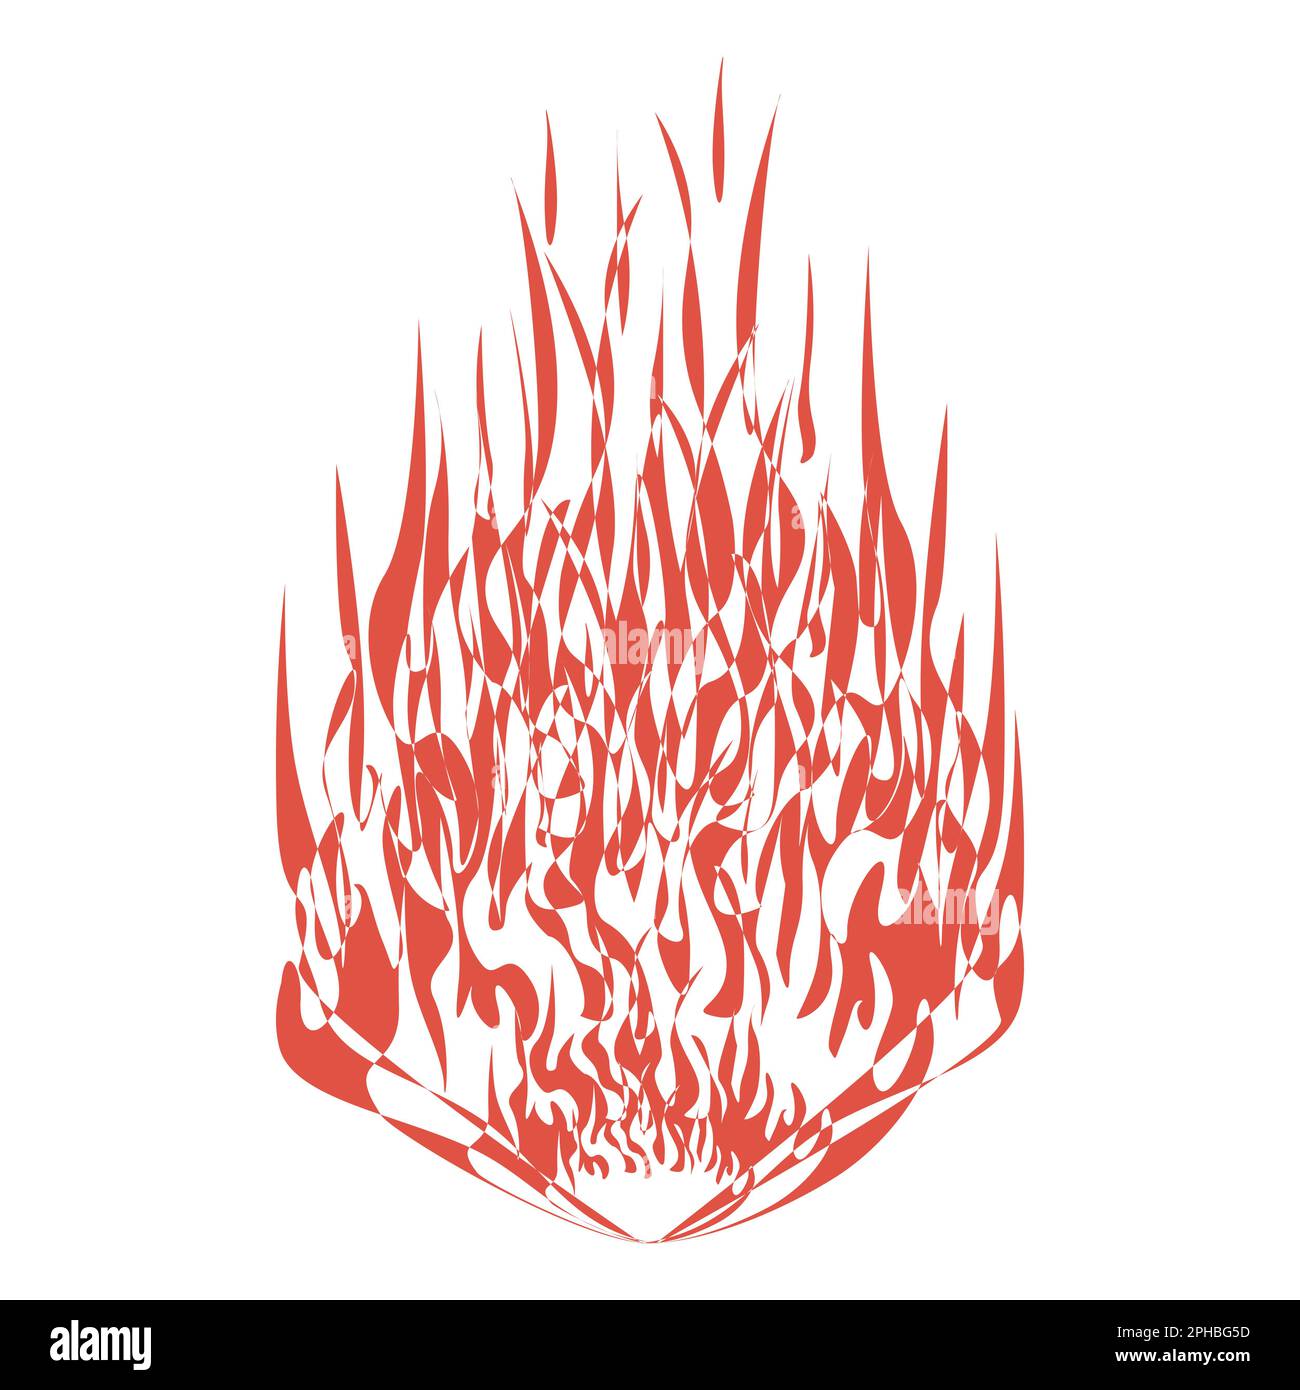 Fire in outline style. Big flame. Bright flaming elements. Colorful vector illustration on a white background. Stock Vector